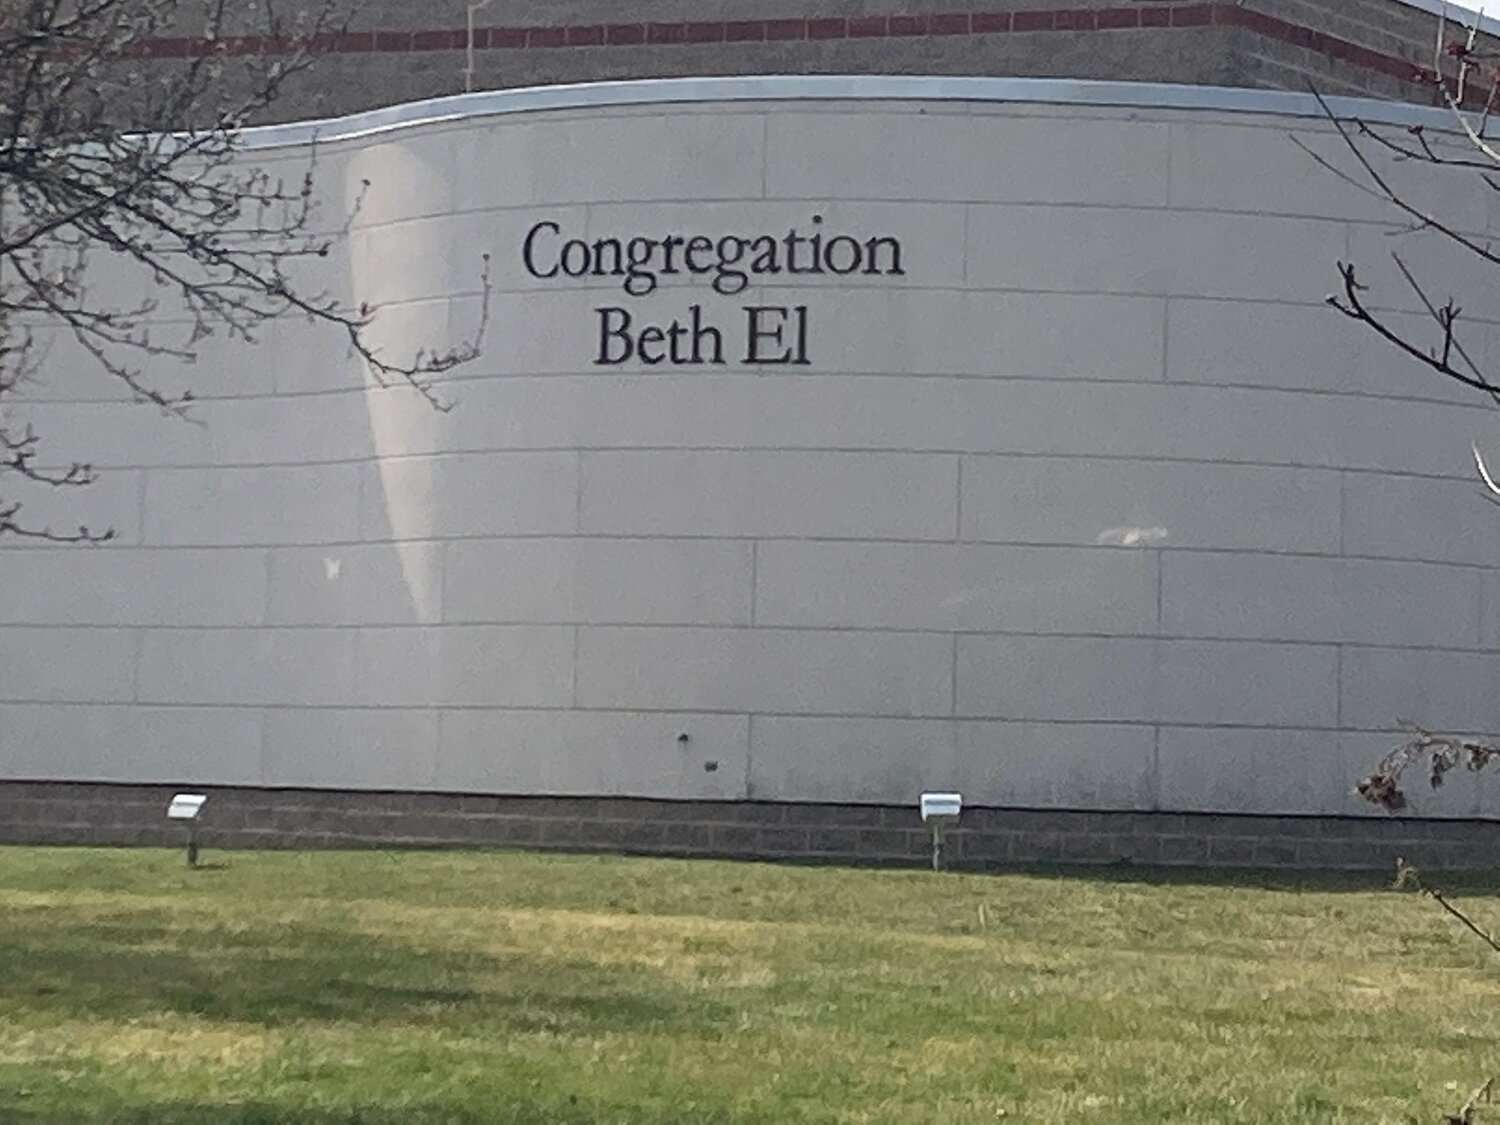 Verizon Wireless is requesting a 150-foot-high cell phone tower on the property of the Beth El synagogue at 375 Stony Hill Road.